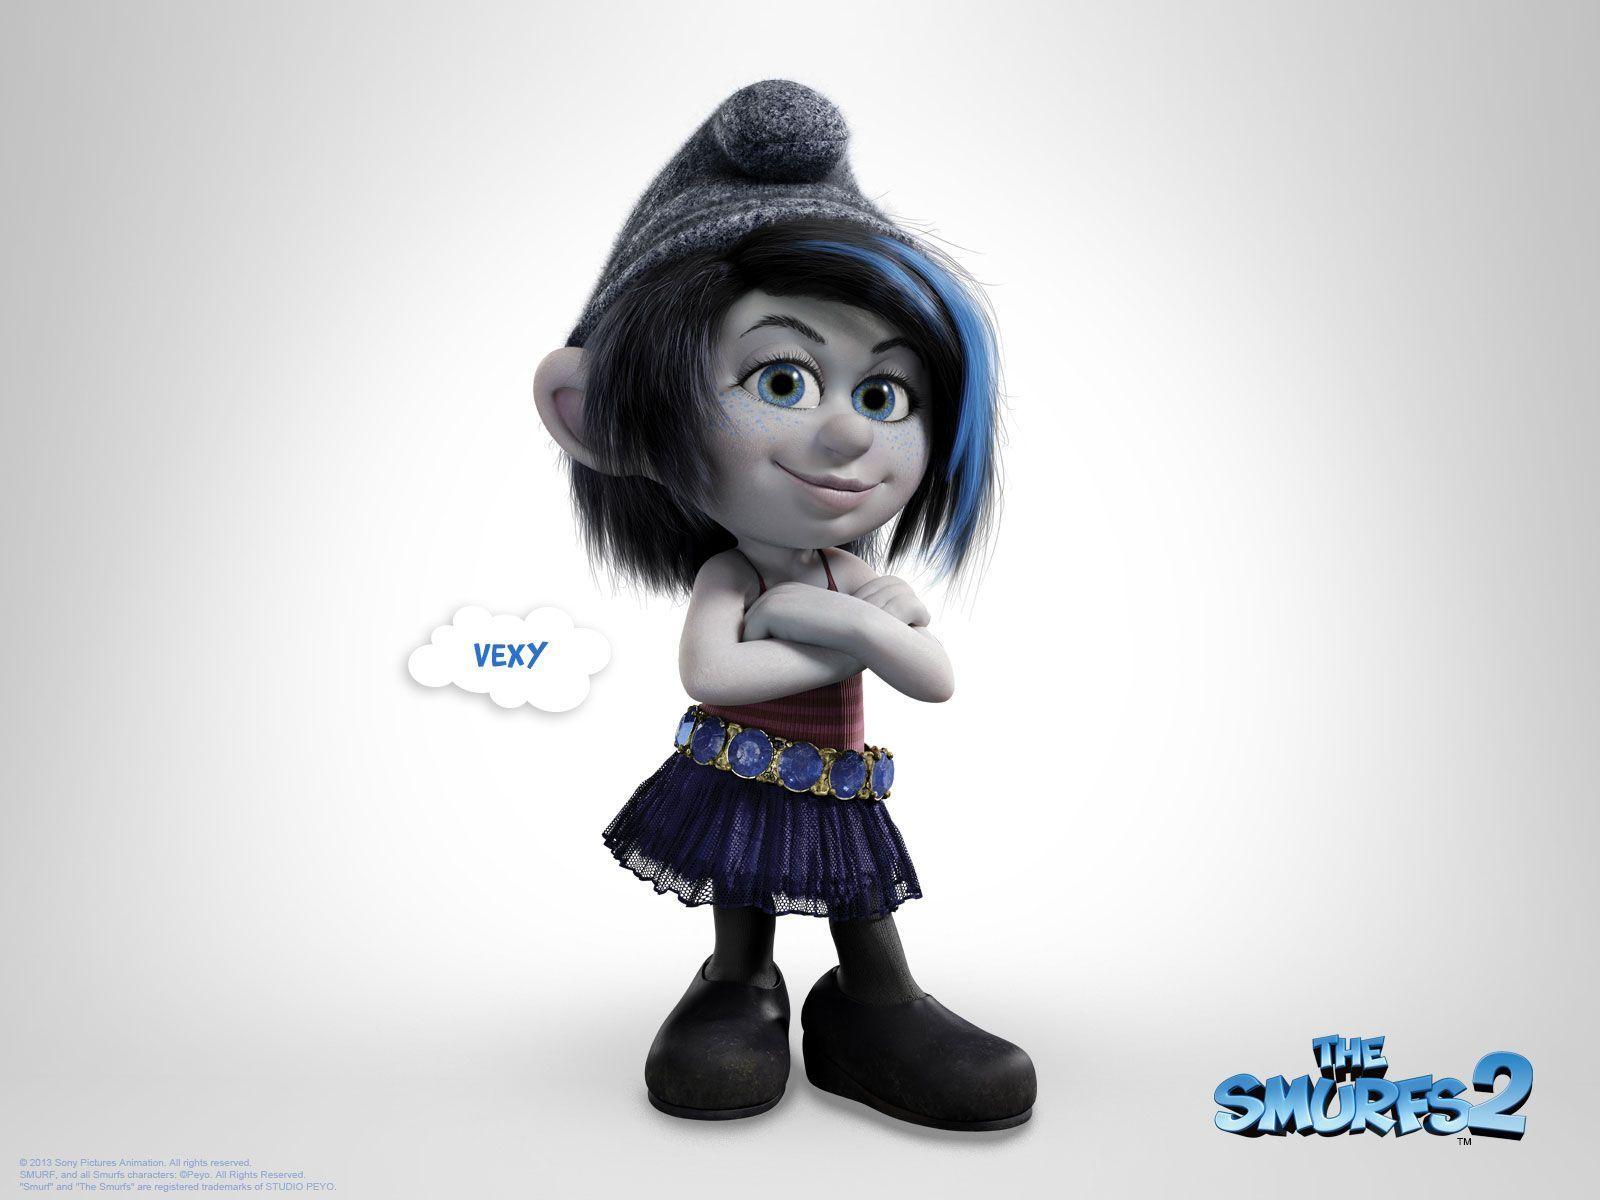 The Smurfs 2 (2013) Wallpaper, Facebook Cover Photo & Characters